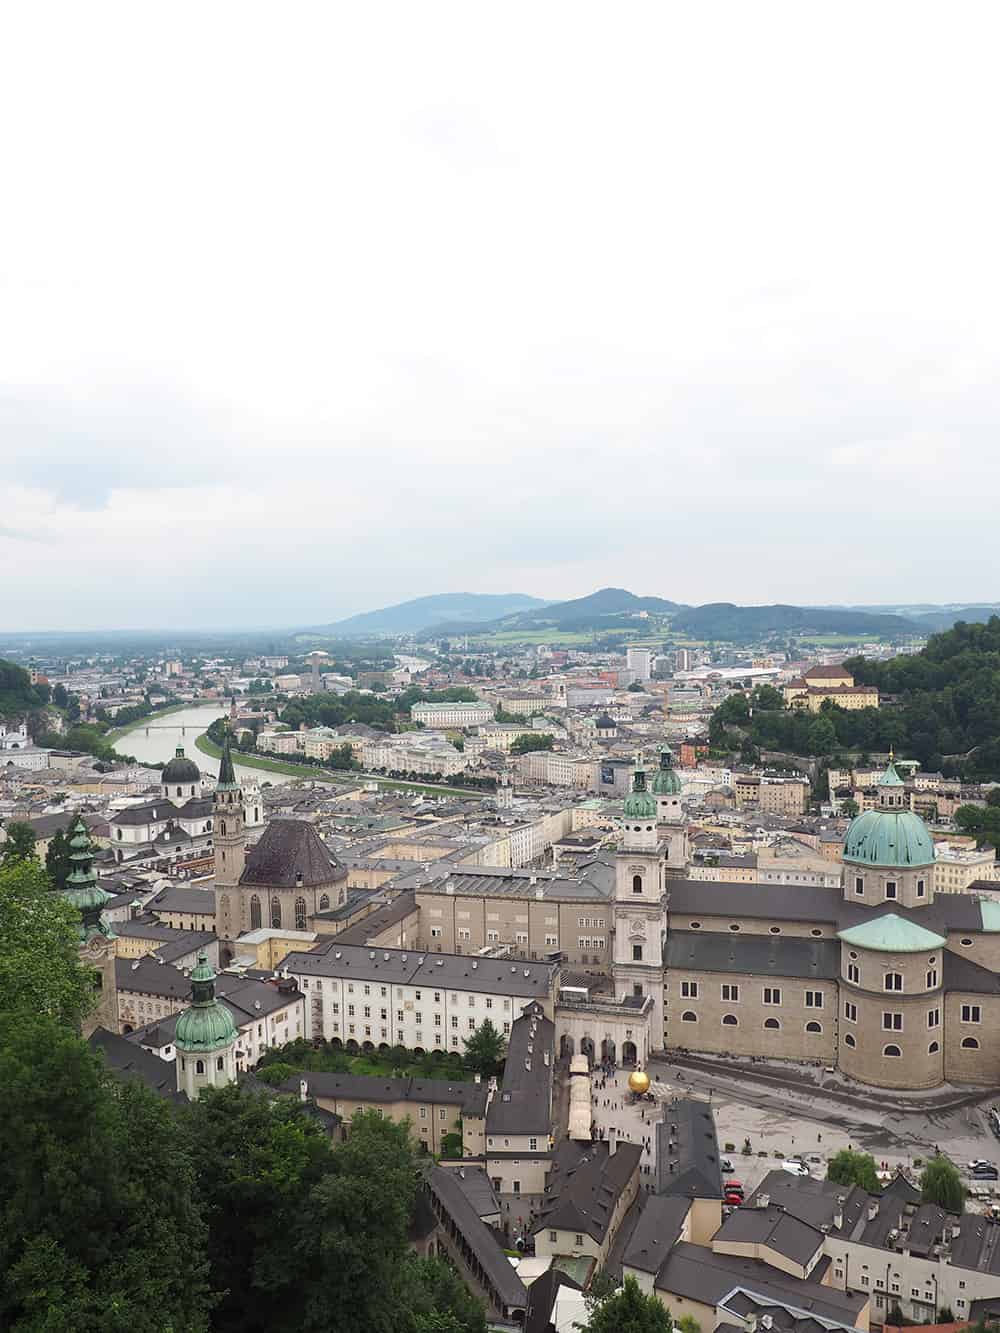 The view from Fortress Hohensalzburg in Salburg, Austra | via Autumn All Along